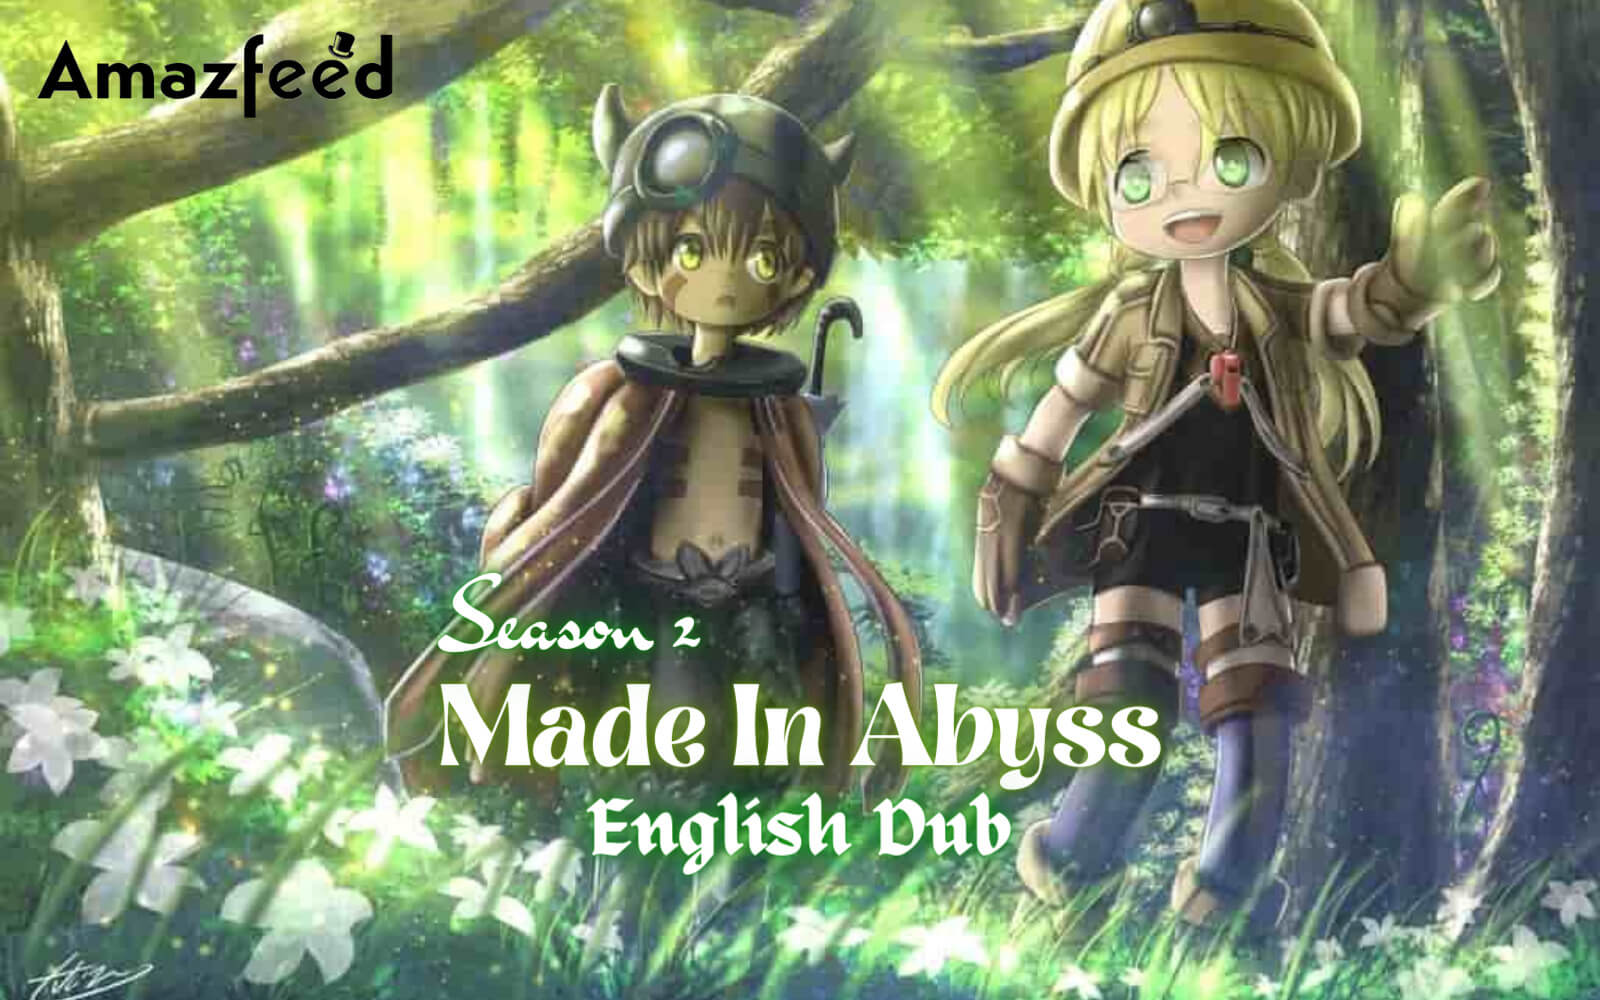 Made in Abyss Season 2 English Dub: Release date, Voice artist, Plot, Recap  » Amazfeed